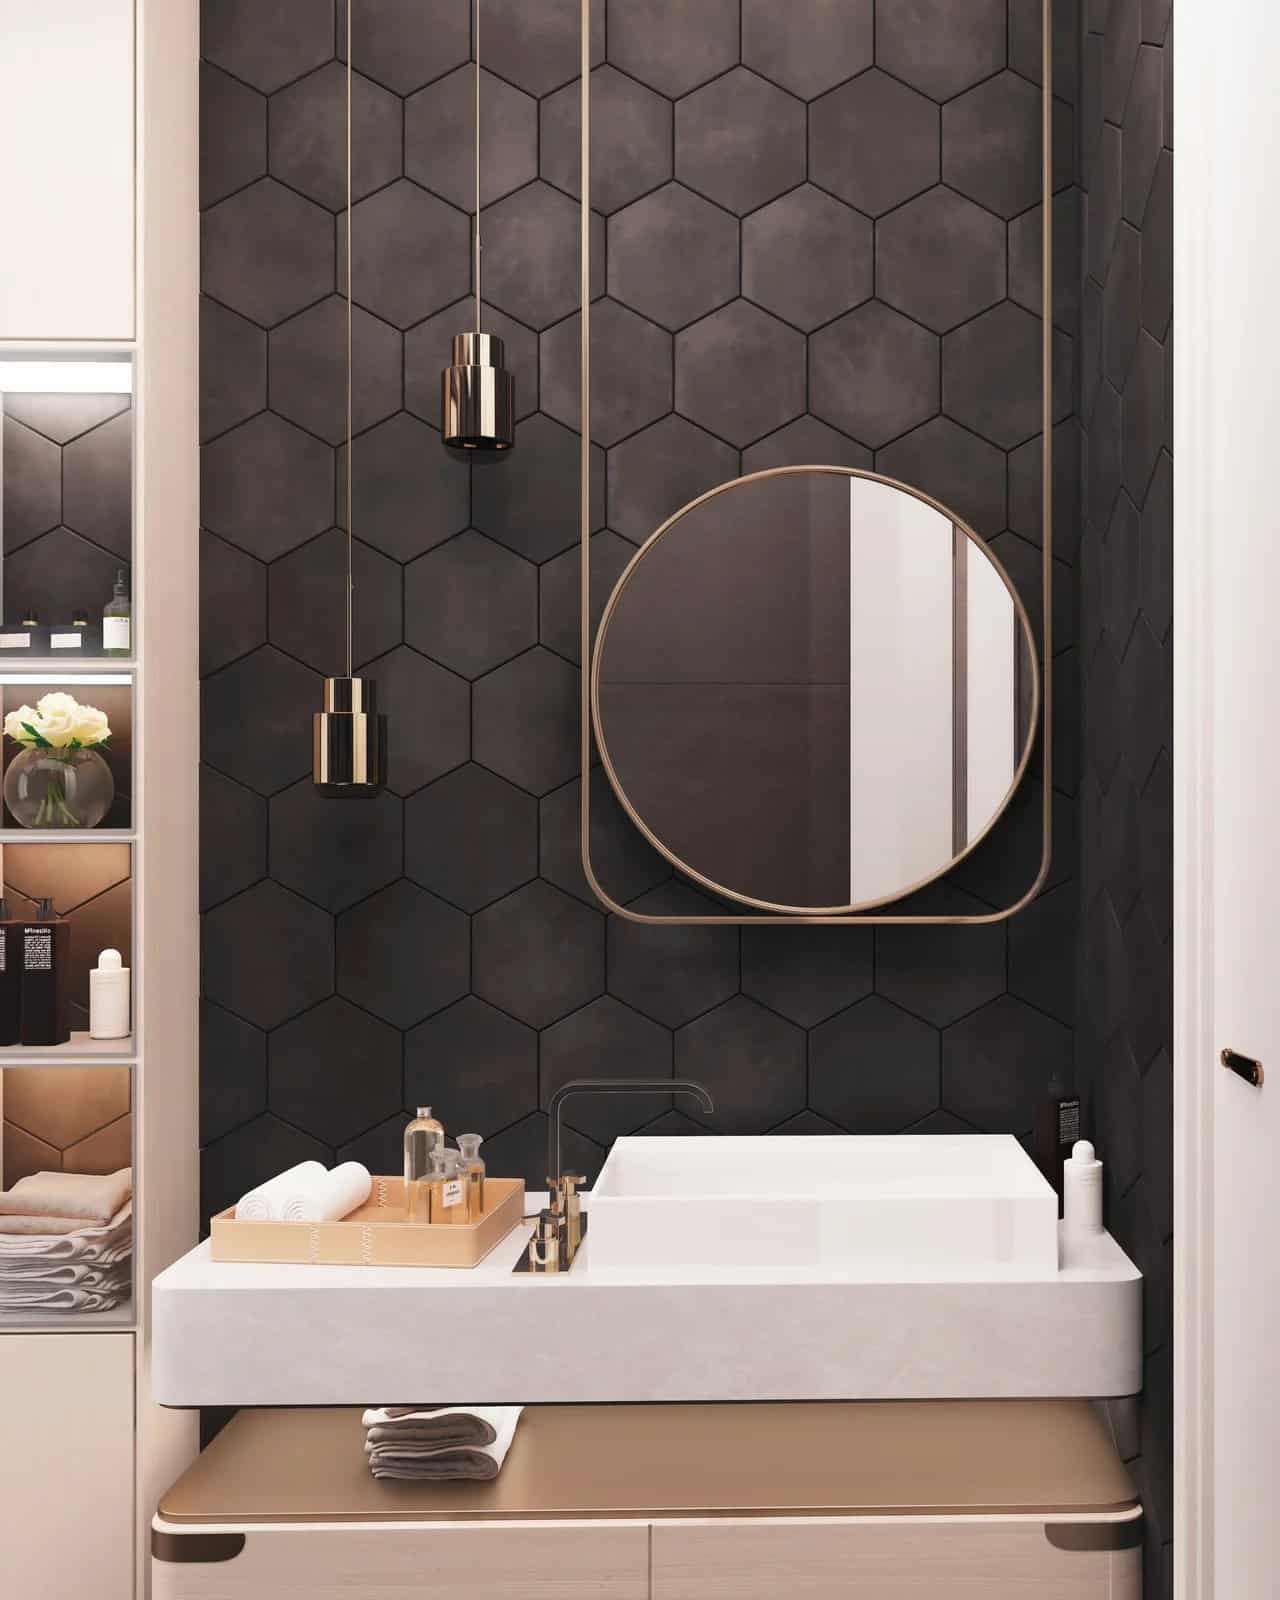 You Can't Go Wrong With Matte Black Honeycomb Tiles